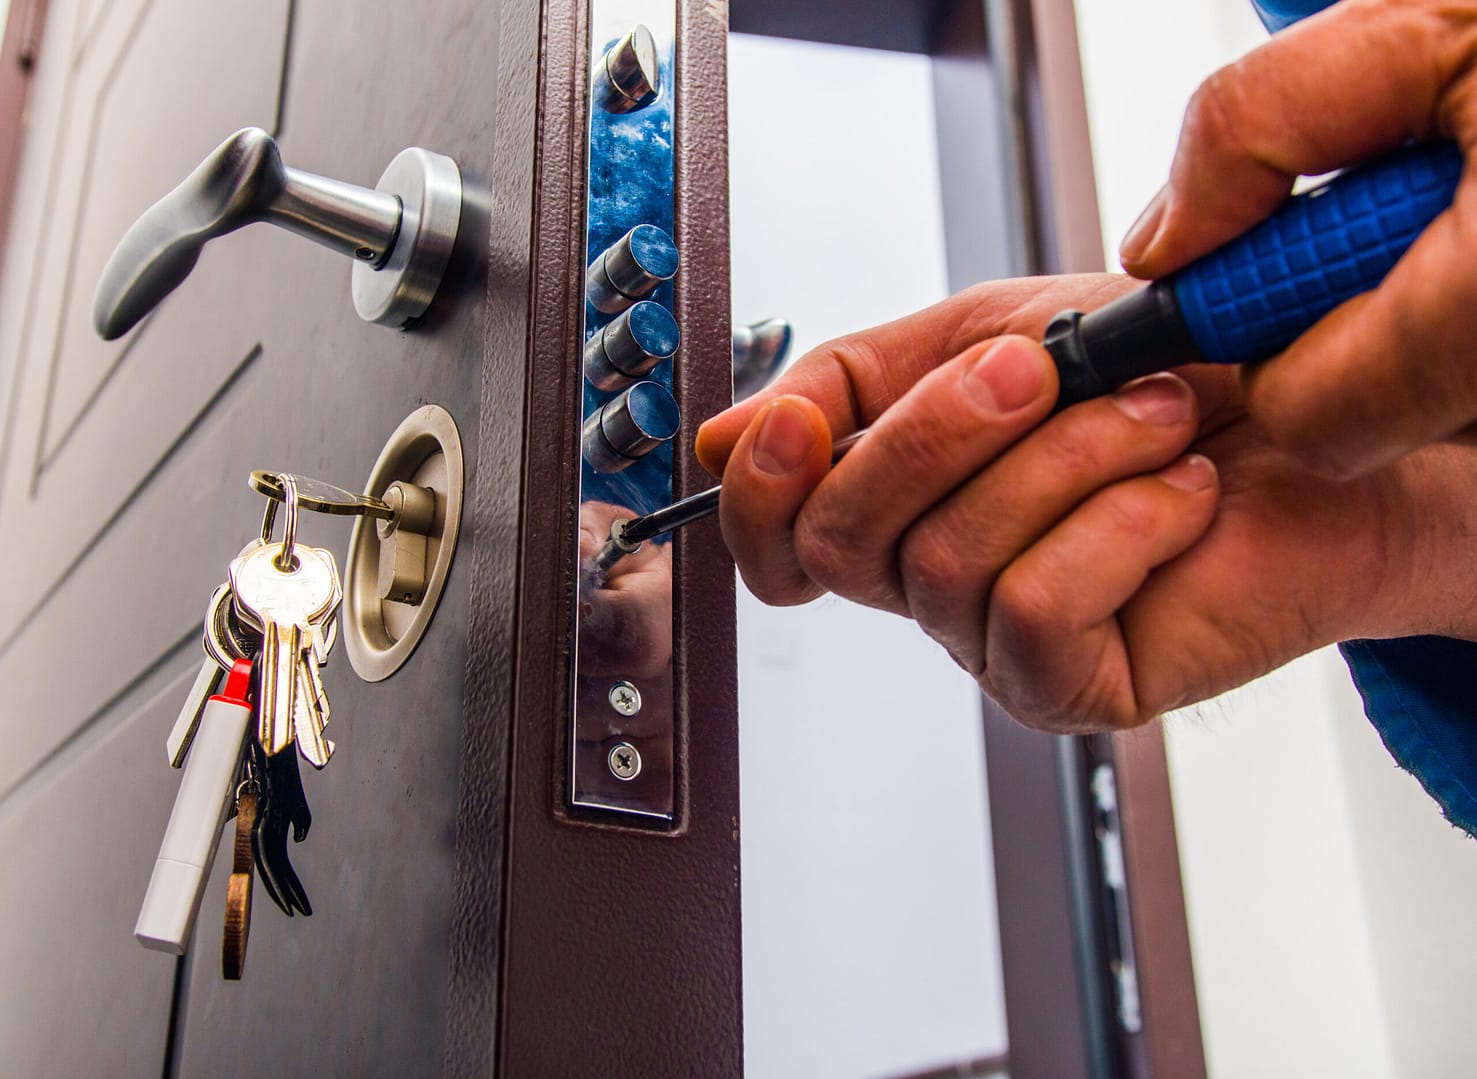 Locksmith installs a deadbolt to enhance security - essential marketing can boost service visibility